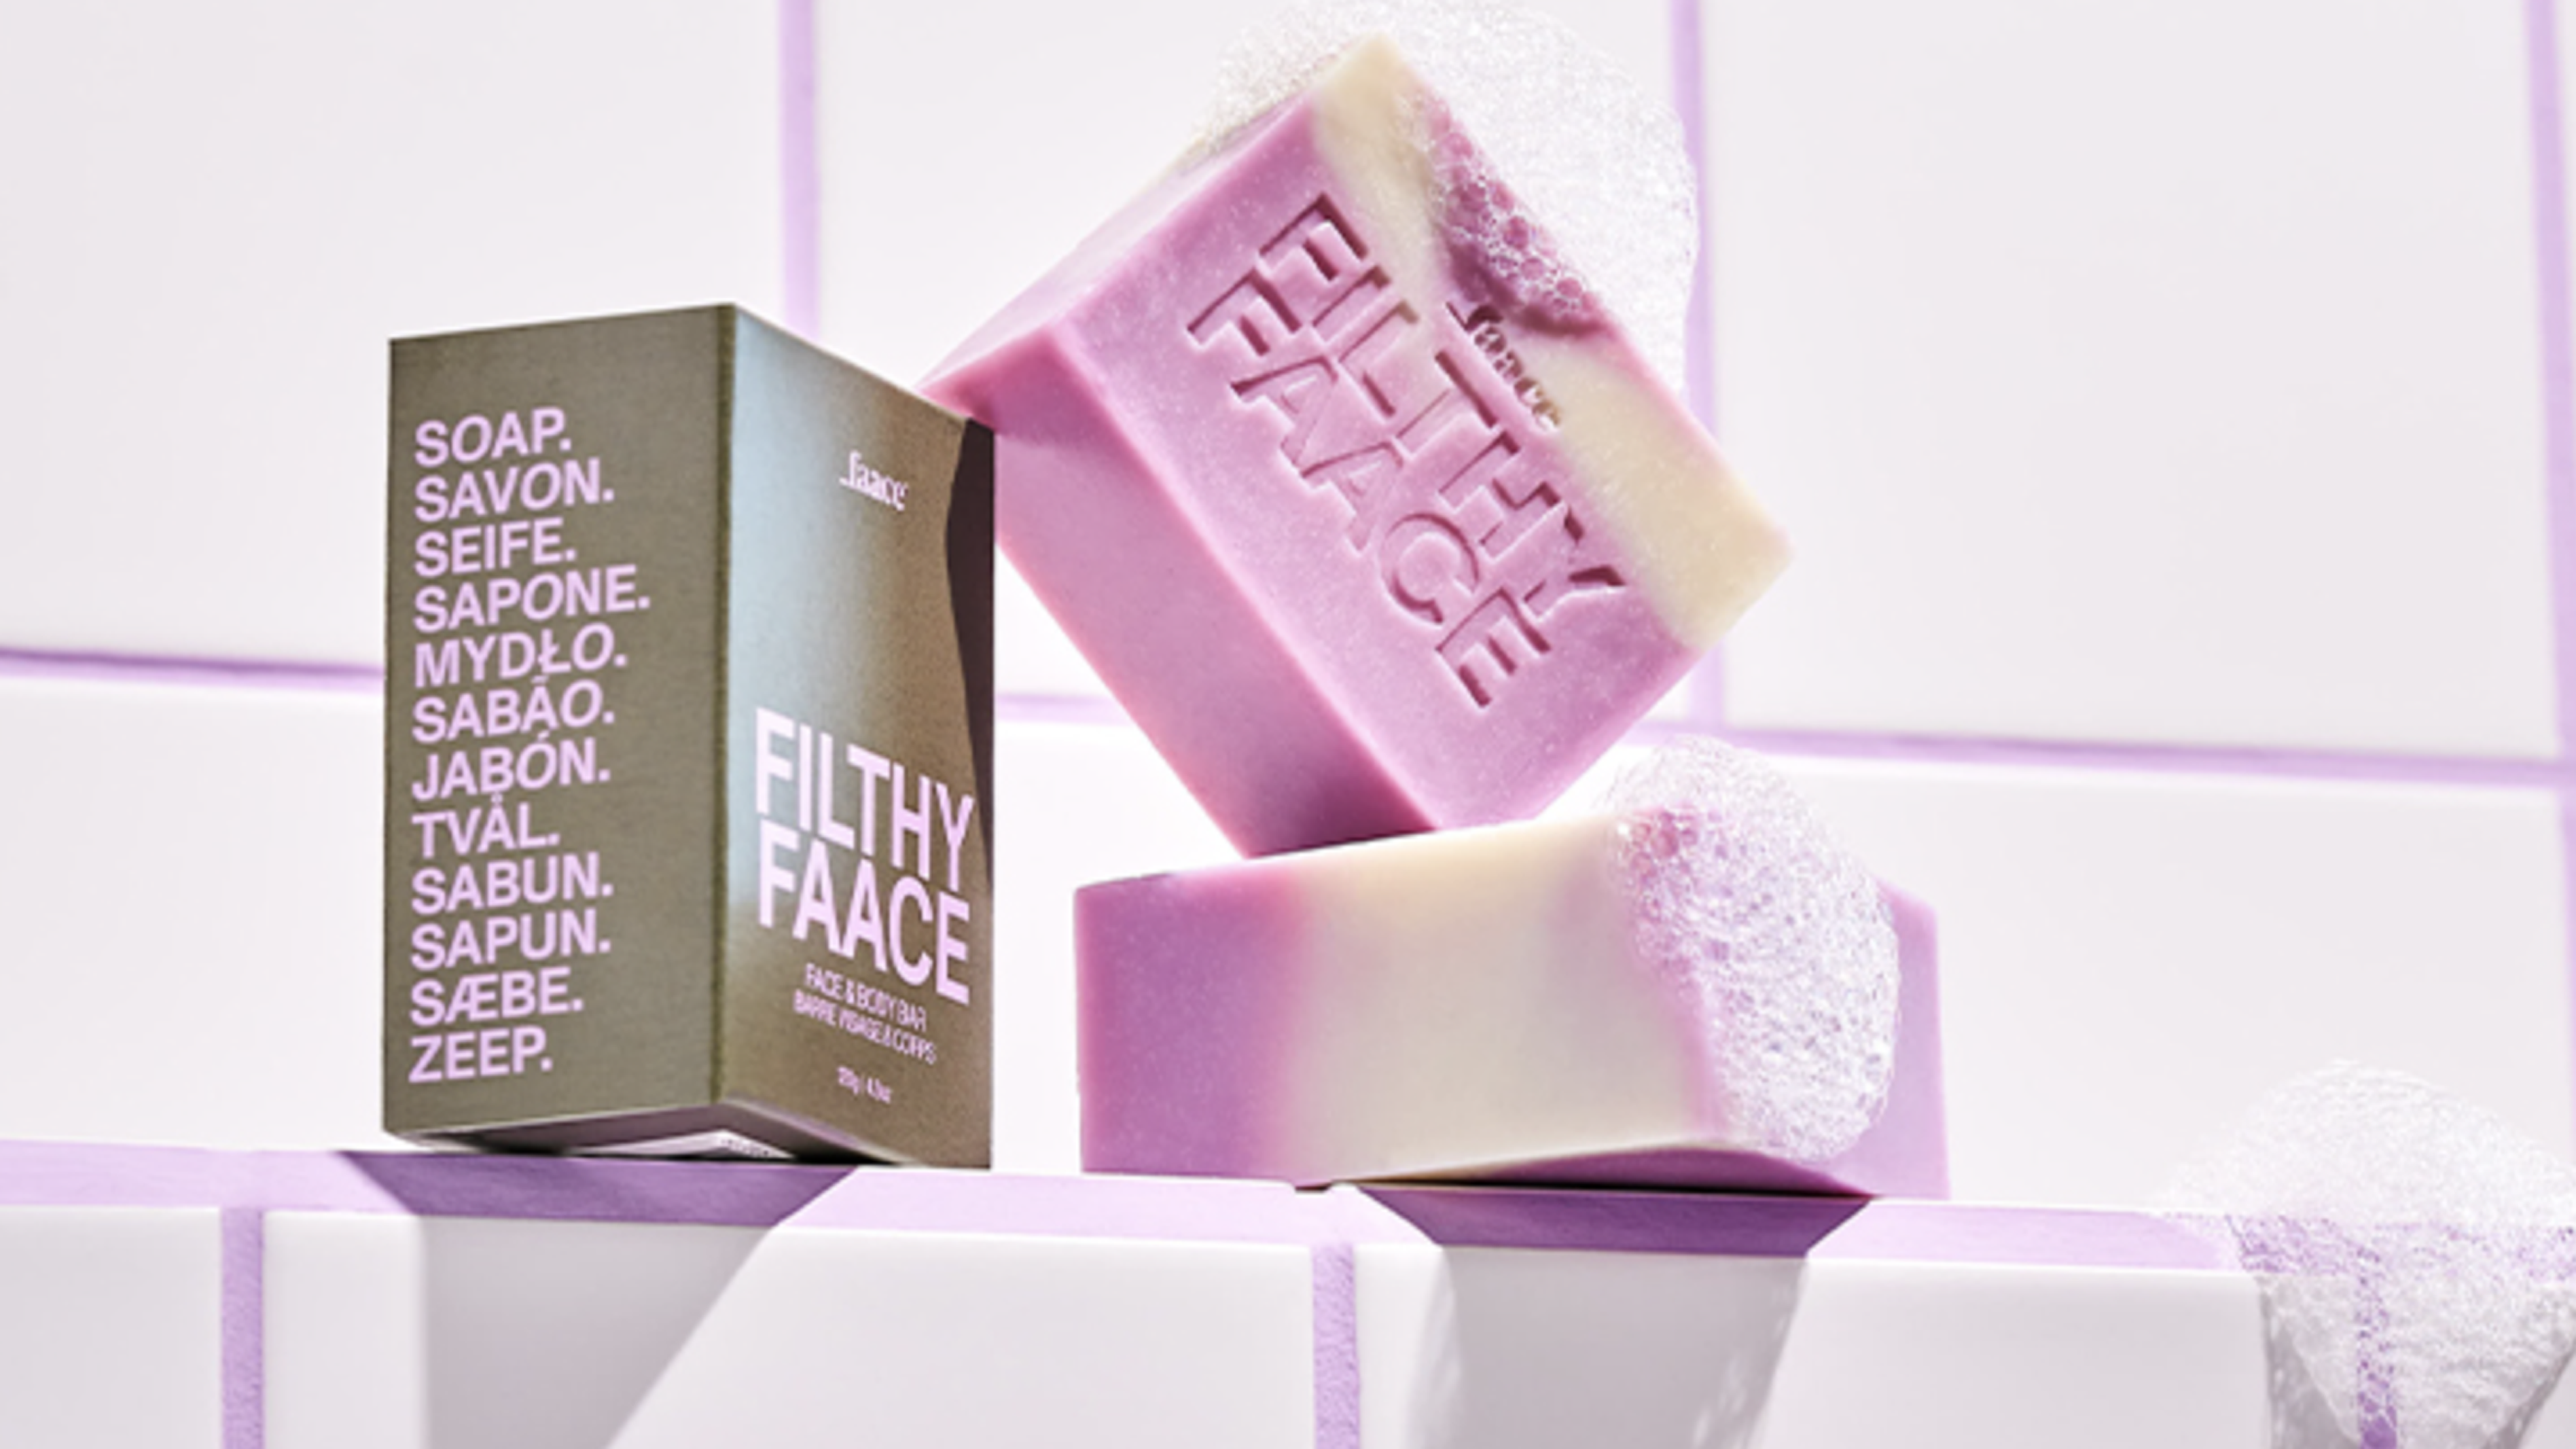 Filthy Faace soap